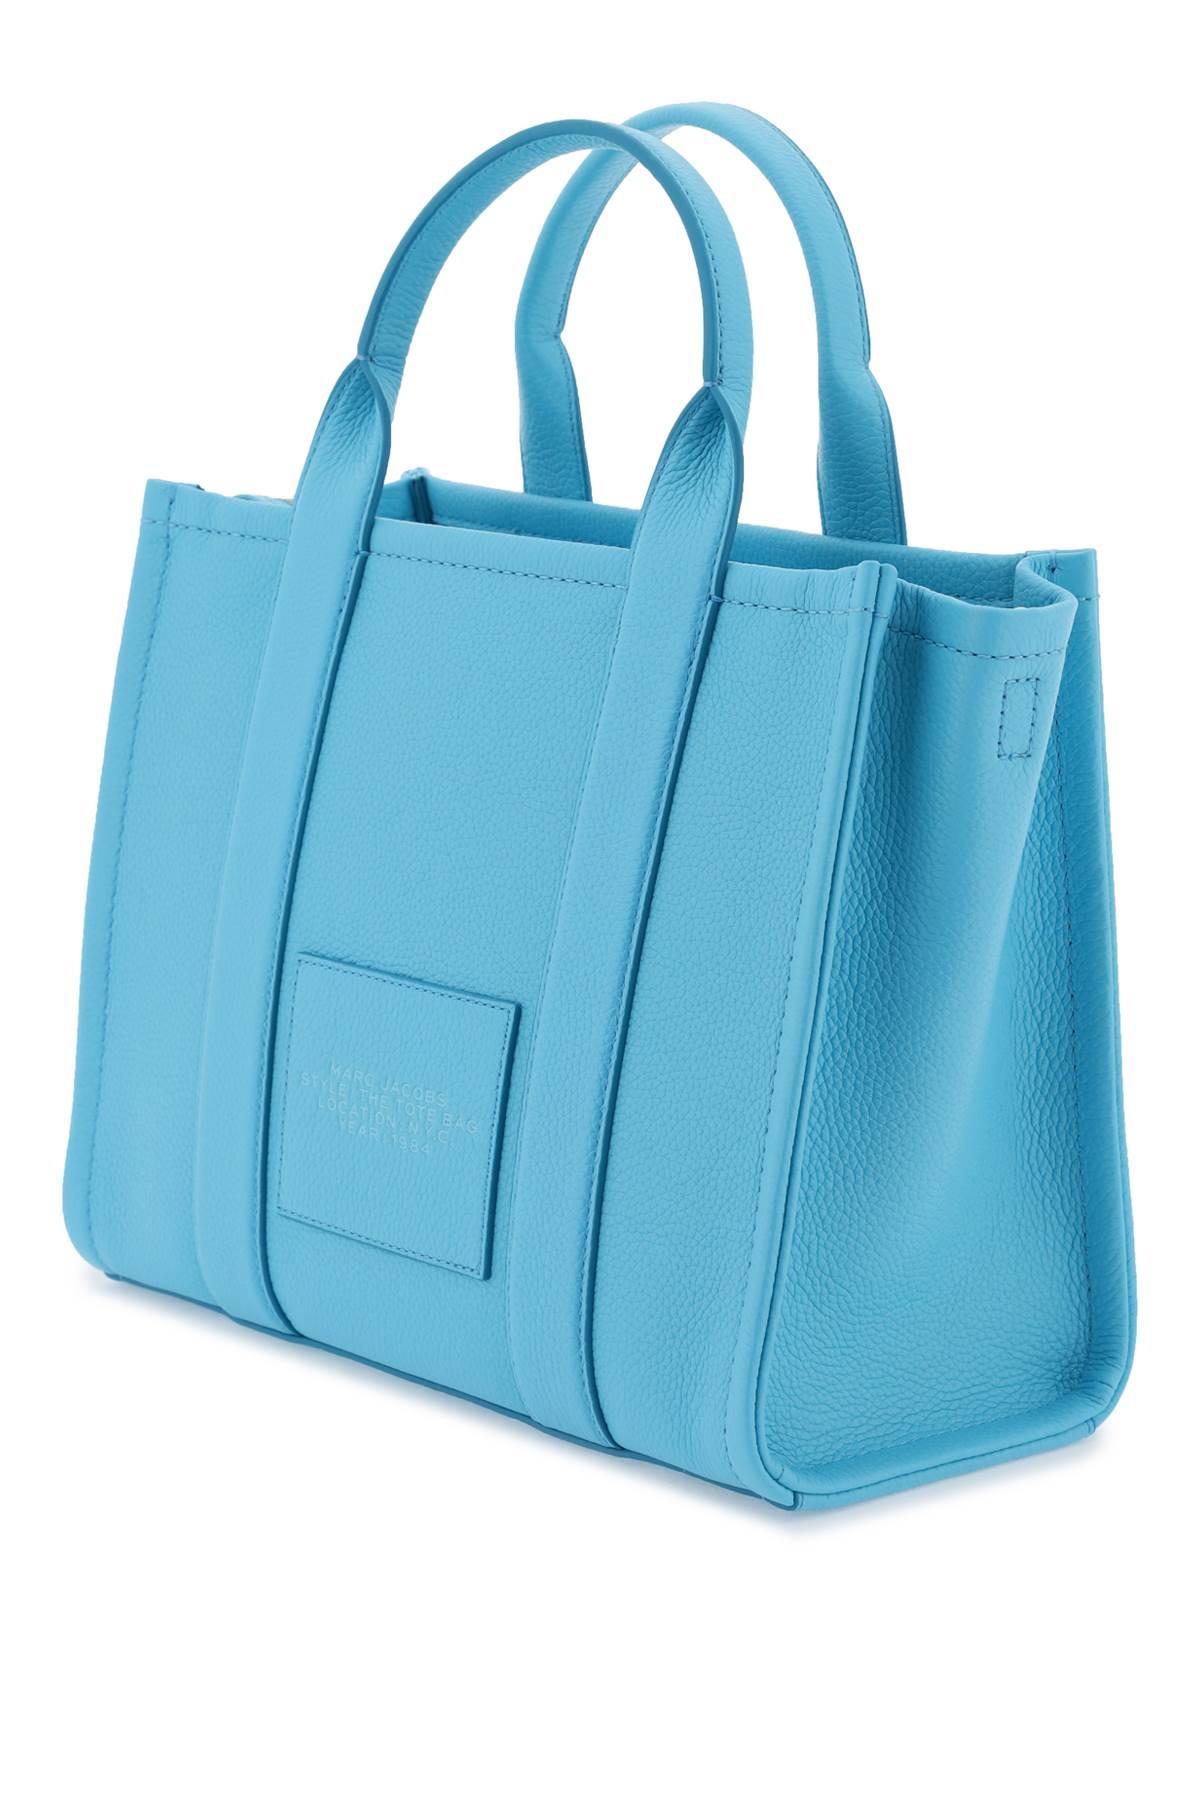 Marc Jacobs Leather Medium Tote Bag - Woman Tote Bags Blue One Size